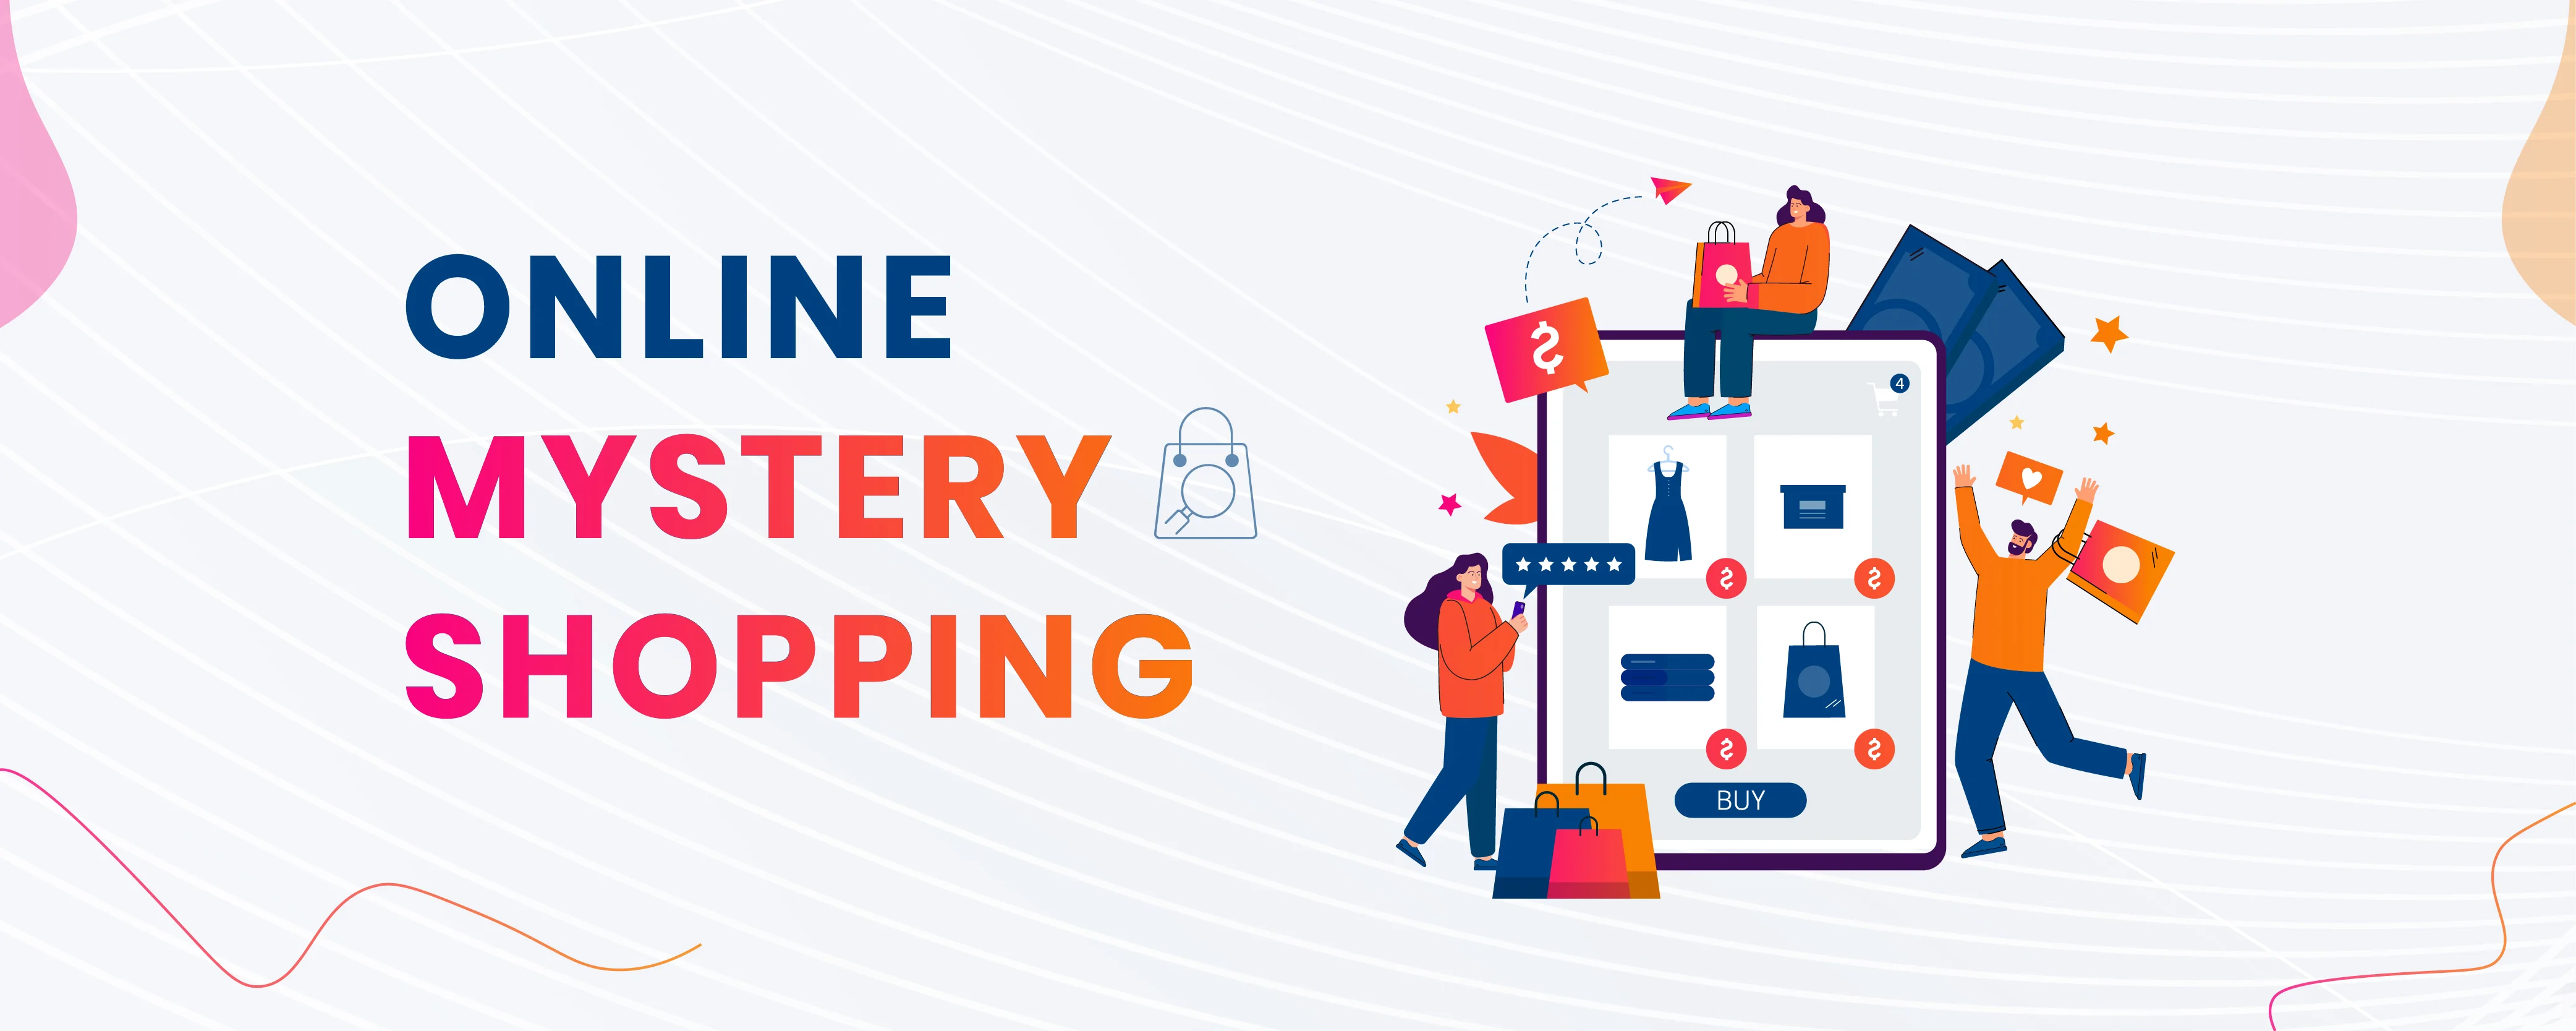 E-commerce Trends and the World of Online Mystery Shopping